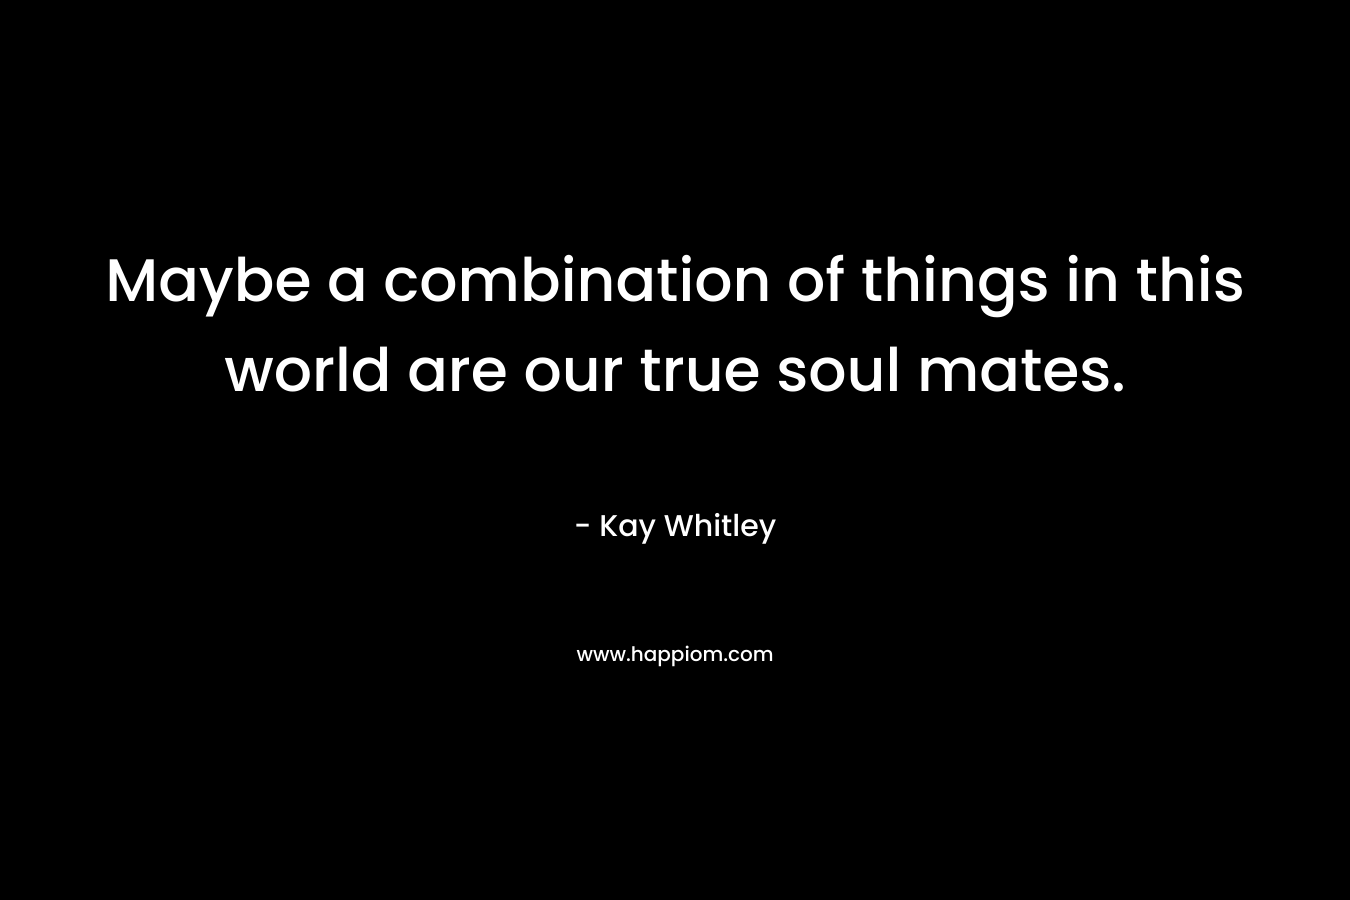 Maybe a combination of things in this world are our true soul mates. – Kay Whitley